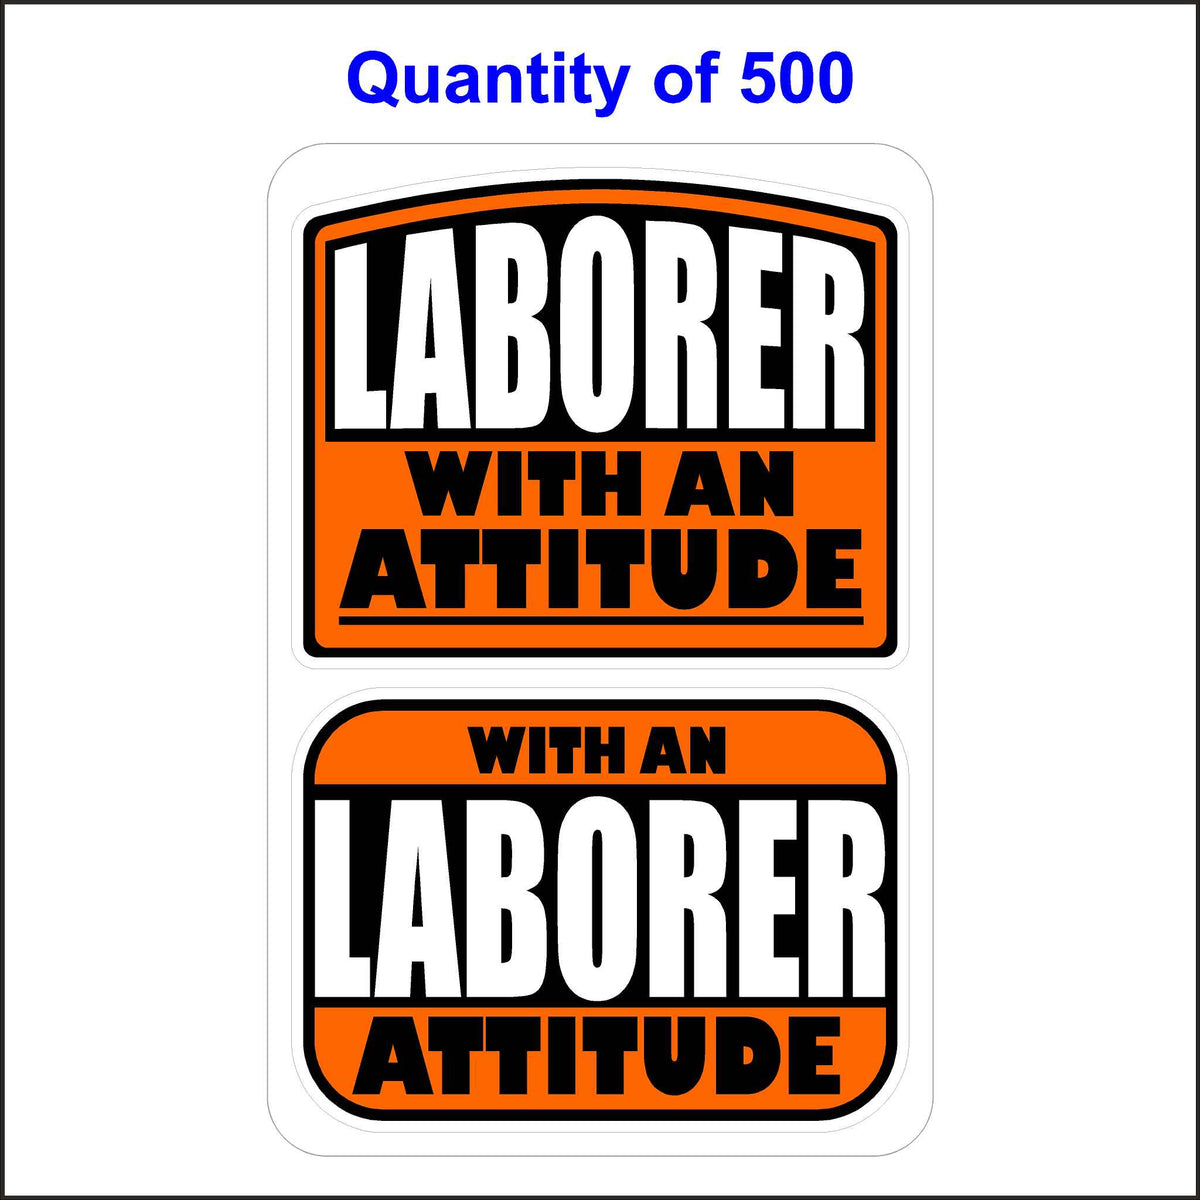 Laborer With An Attitude Stickers 500 Quantity.